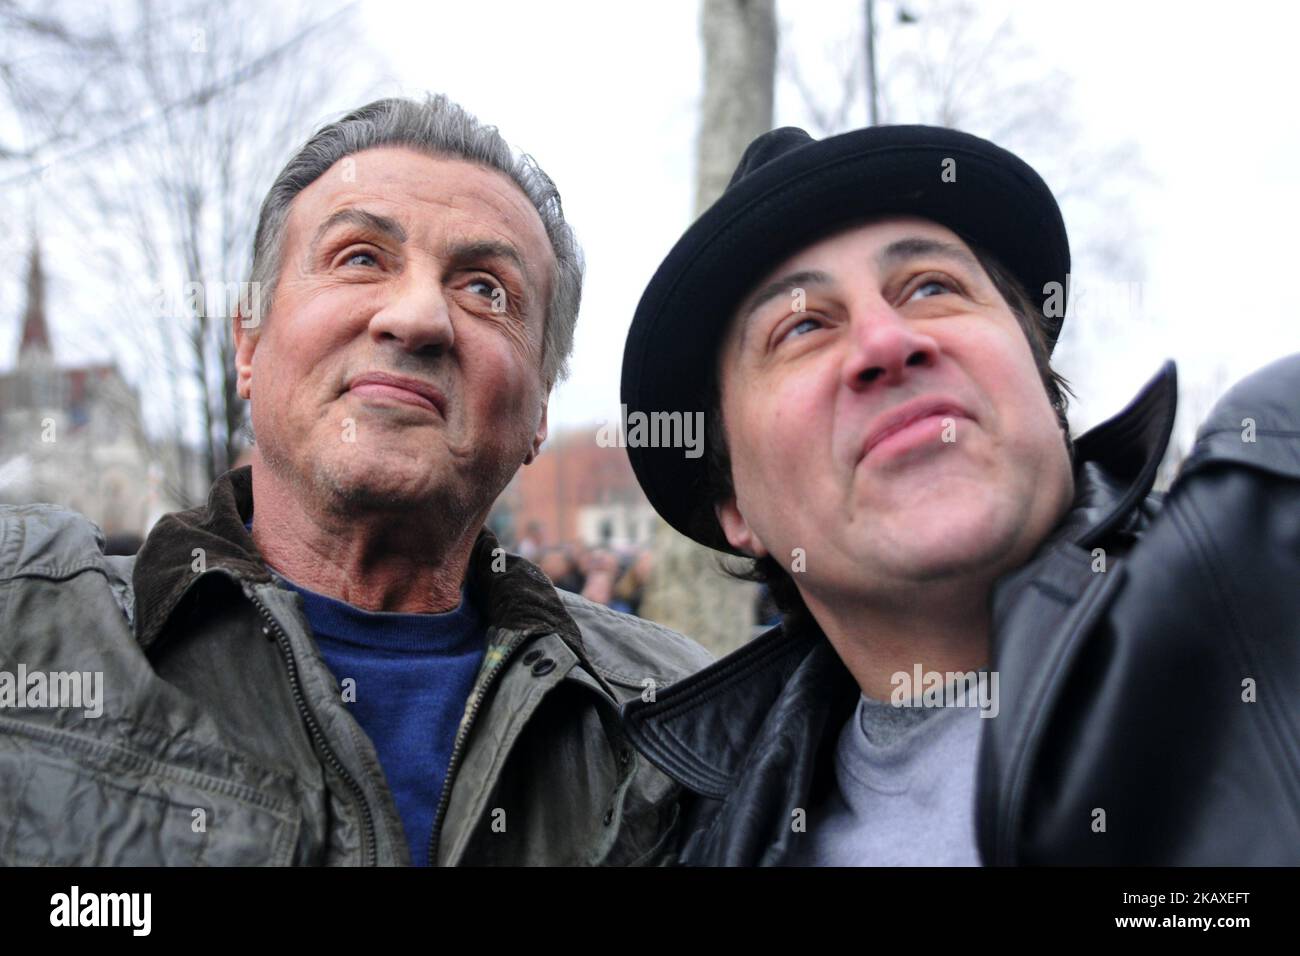 Actor, director Sylvester Stallone visits the ‘Rocky statue’ at the Philadelphia Museum of Art, in Philadelphia, PA on April 6, 2018. The legendary Rocky Balboa actor returns to the city for the start of the filming of Creed II. (Photo by Bastiaan Slabbers/NurPhoto) Stock Photo